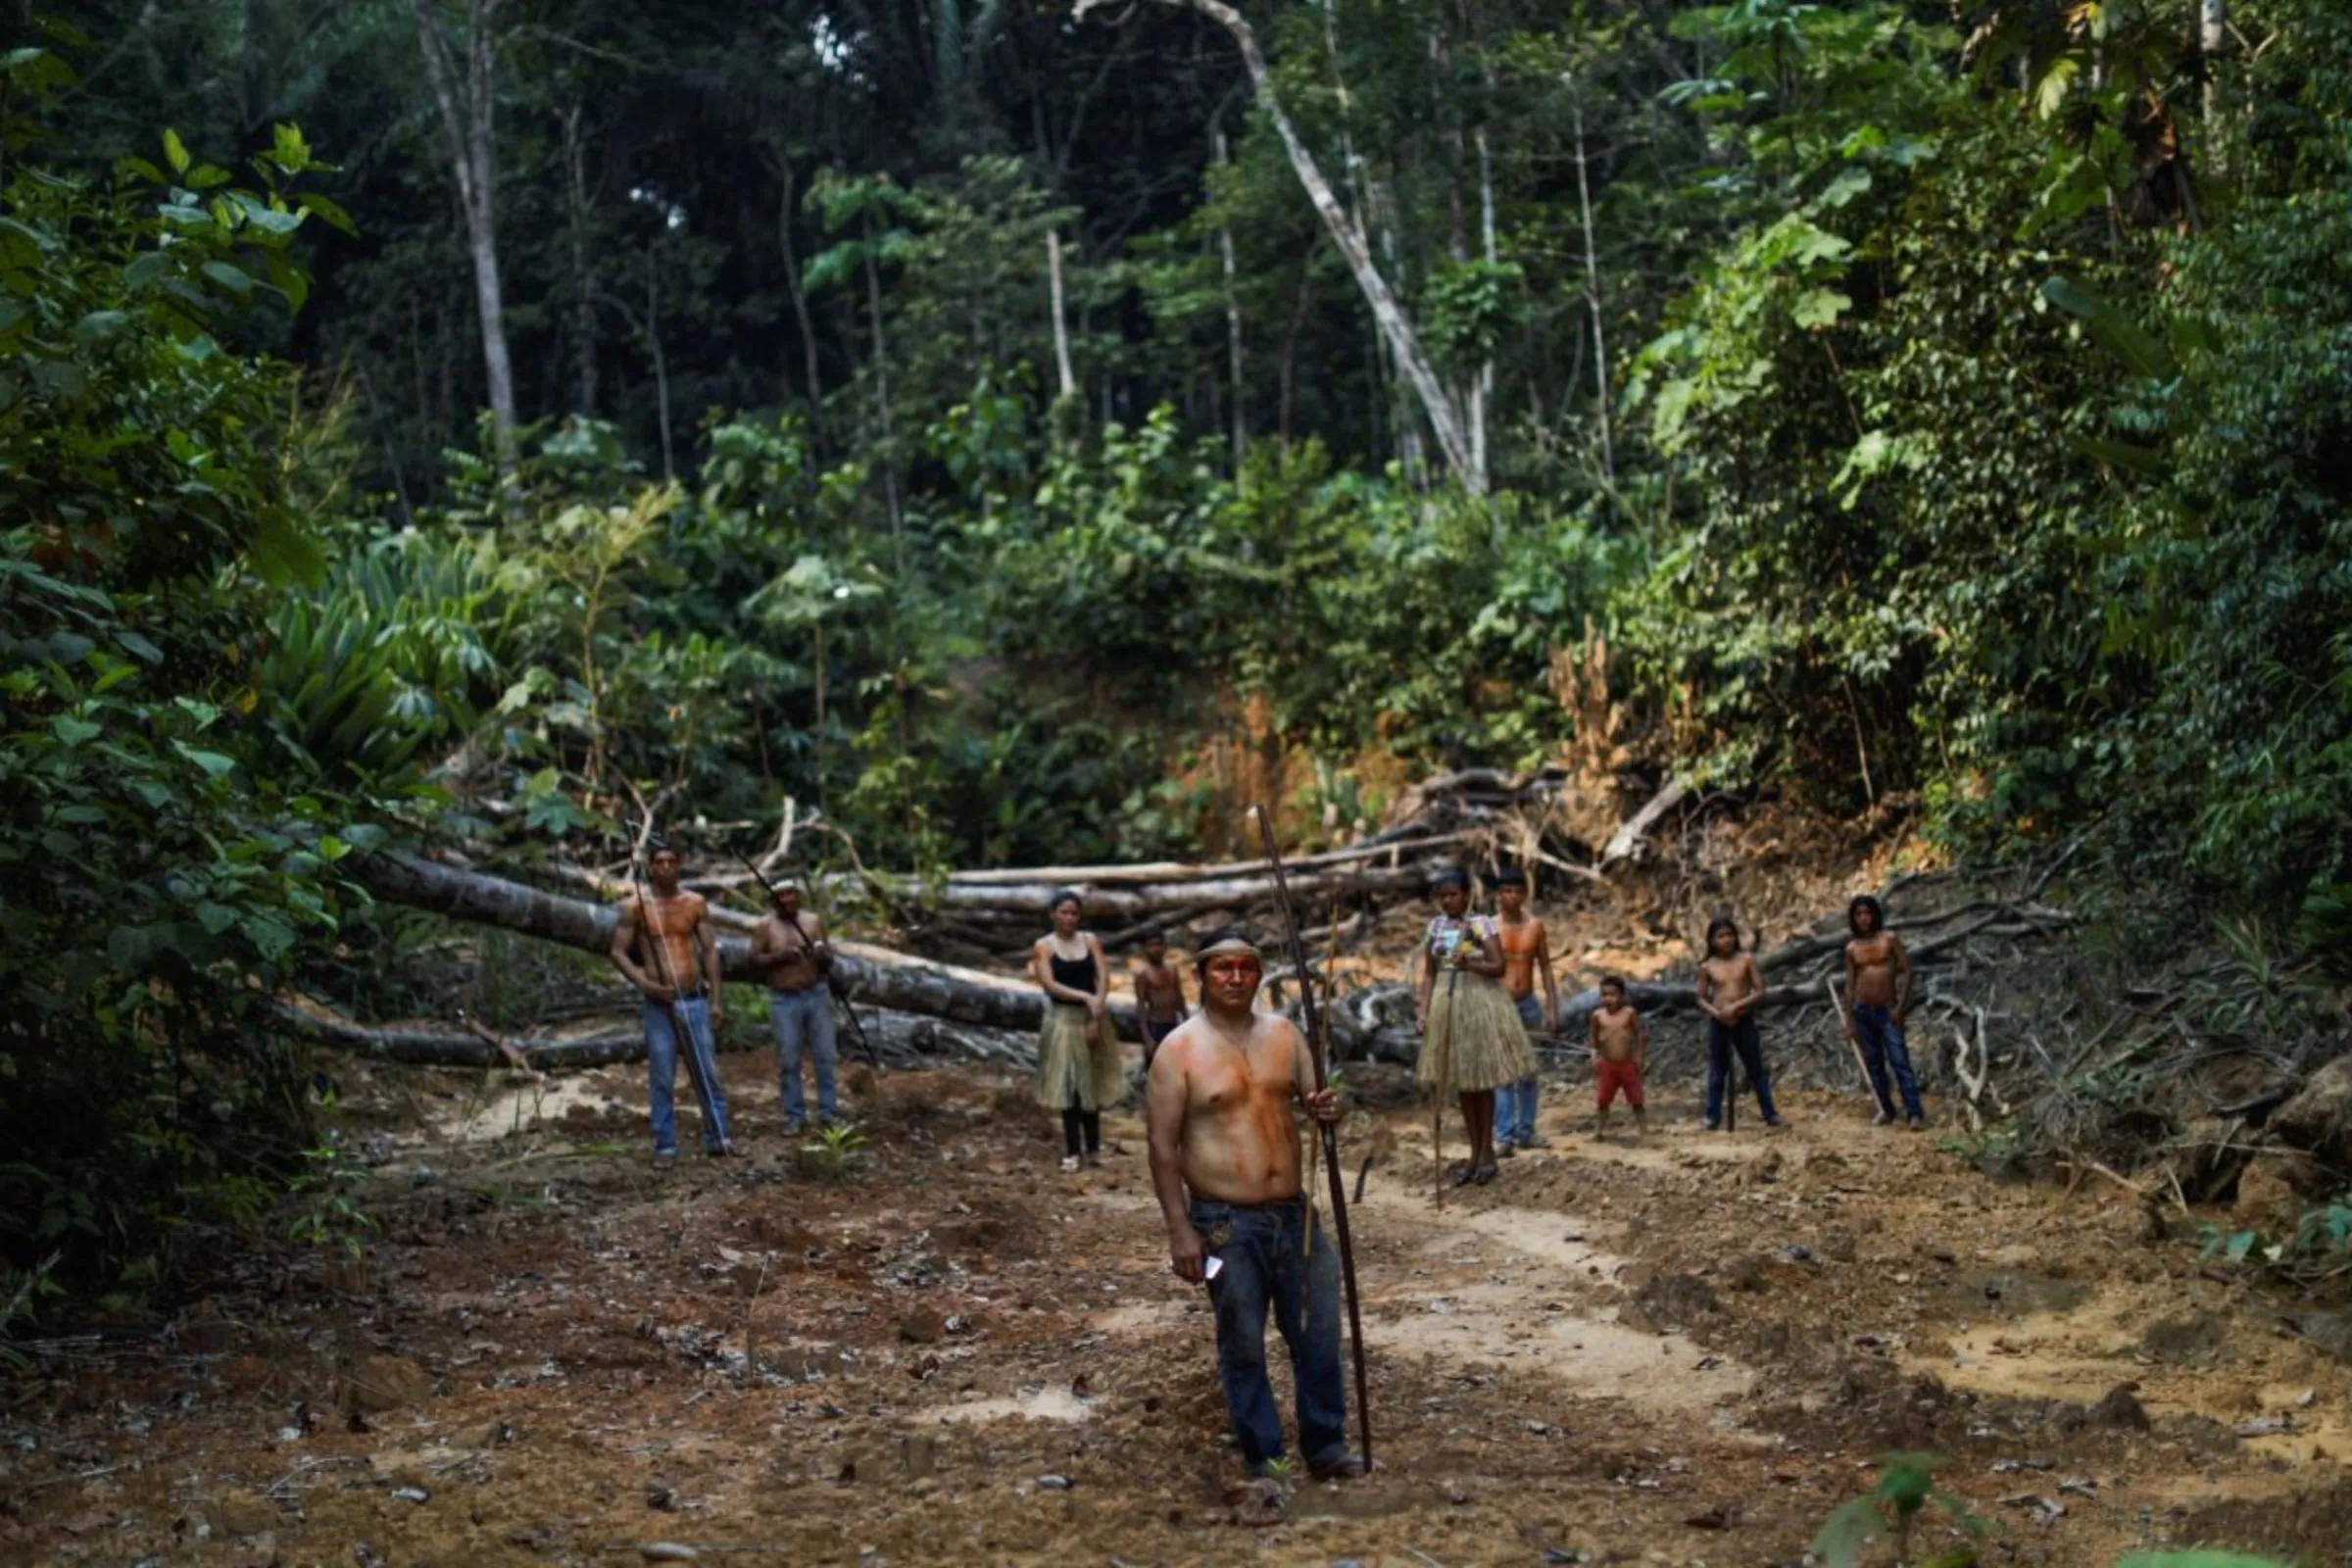 Indigenous Mura people pose for a picture in a deforested area of a non-demarcated indigenous land in the Amazon rainforest near Humaita, Amazonas State, Brazil, August 20, 2019